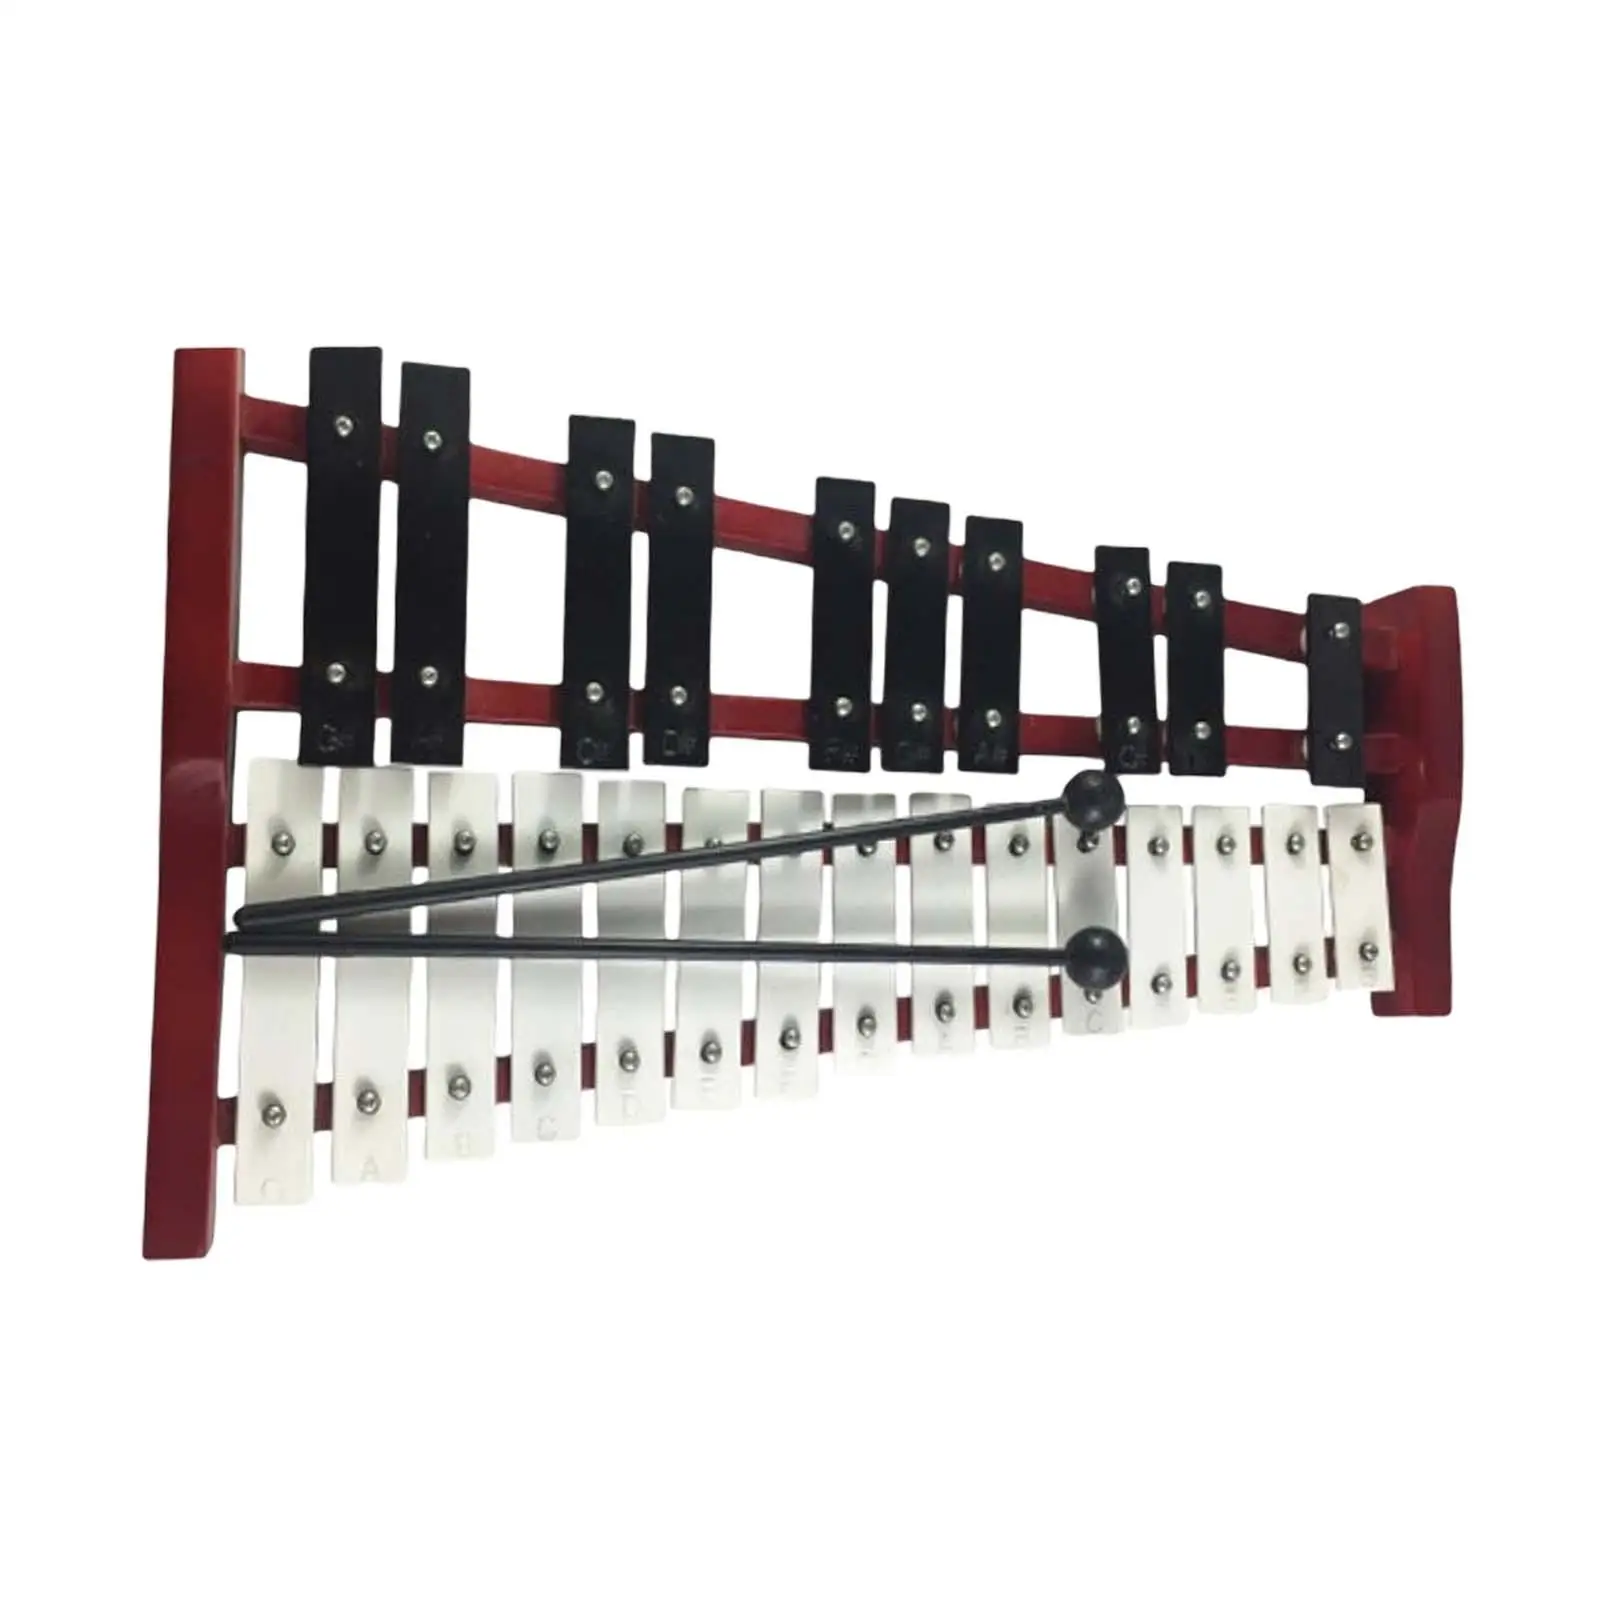 25 Note Glockenspiel Xylophone Compact Size 40x25x8cm Easily Carry Educational Percussion